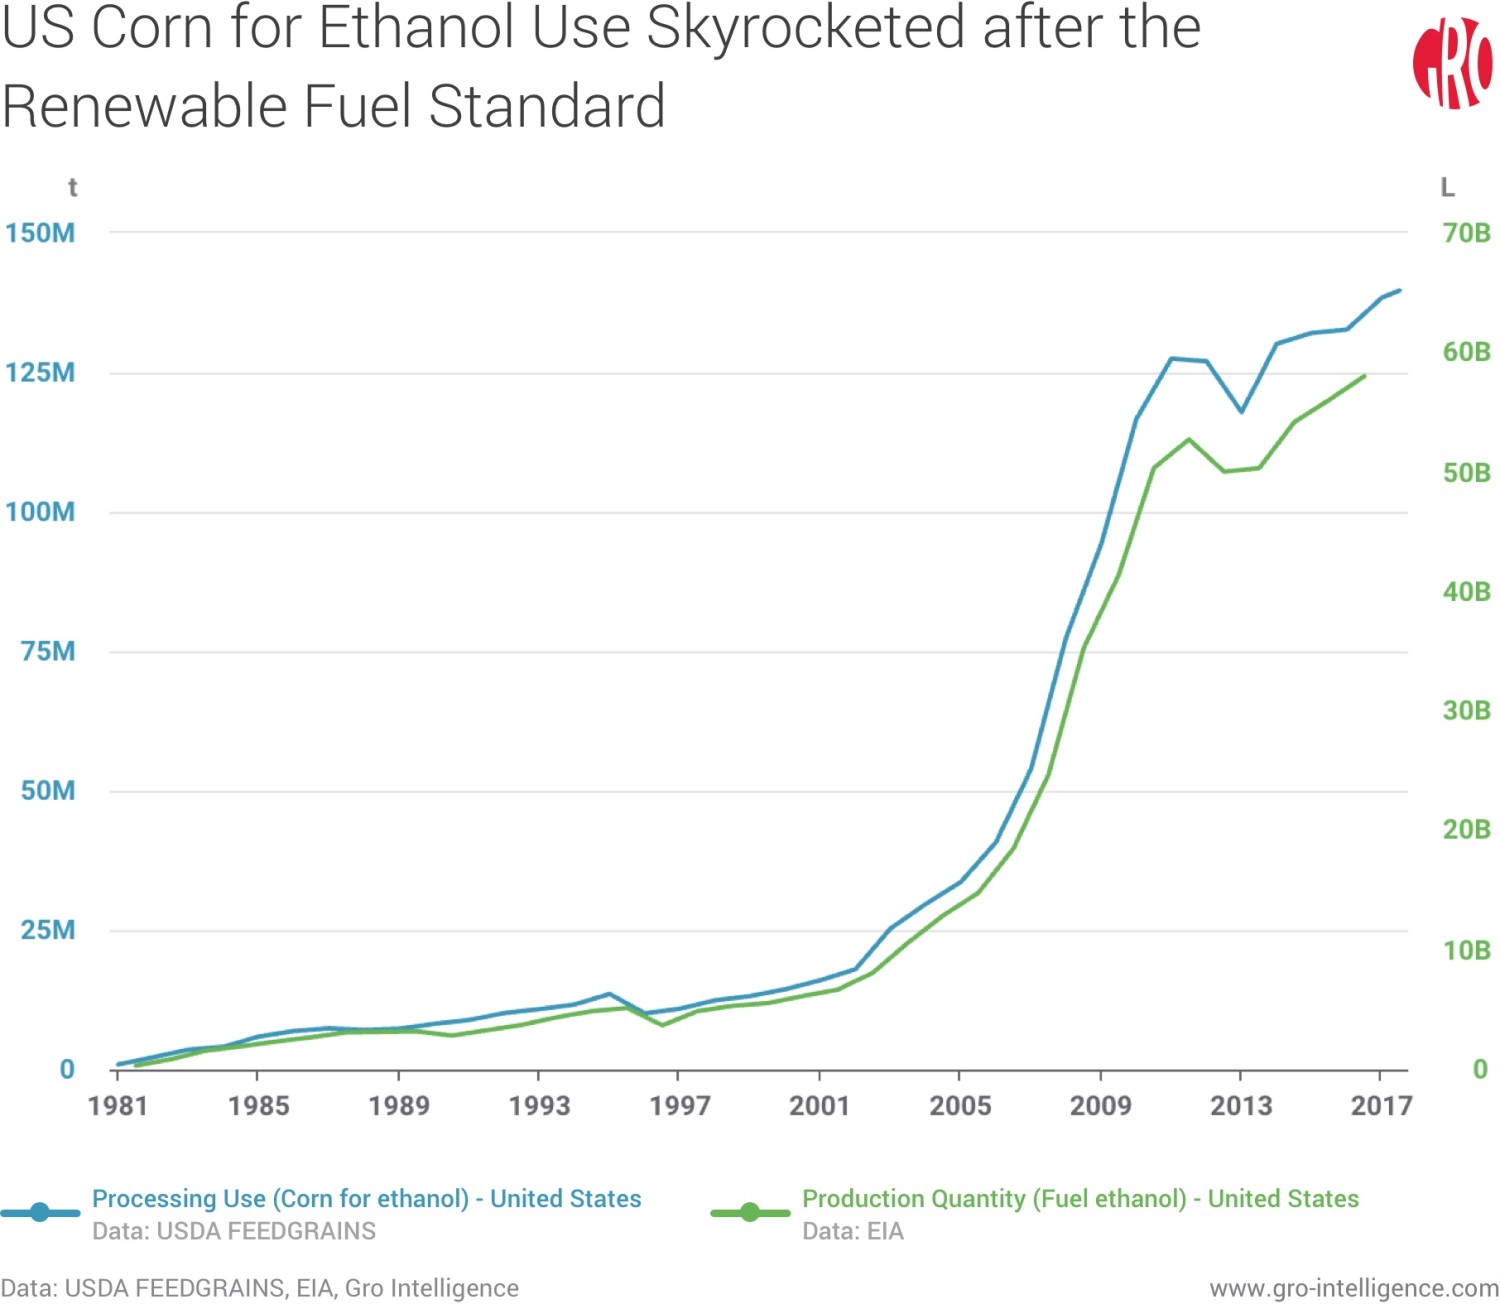 US Corn for Ethanol Use Skyrocketed After the Renewable Fuel Standard